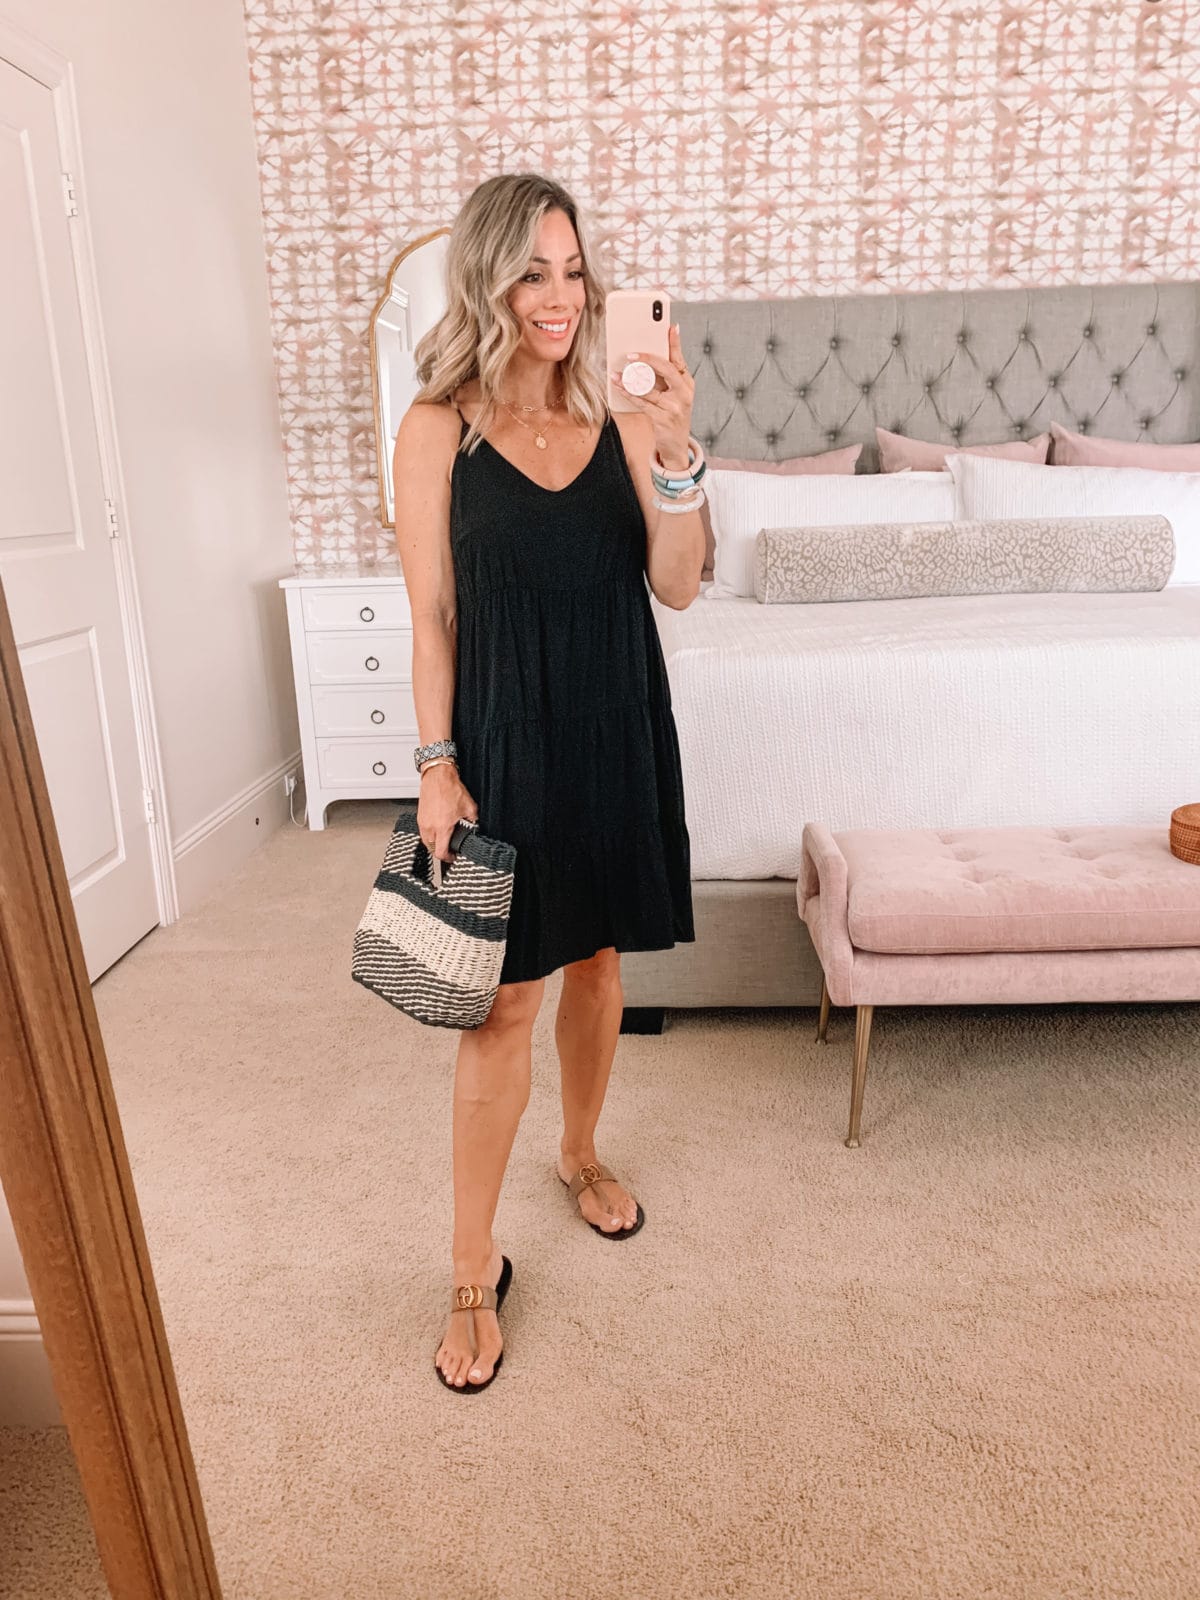 Amazon Fashion Faves, Black Tiered Shift Dress and Woven Clutch with Sandals 